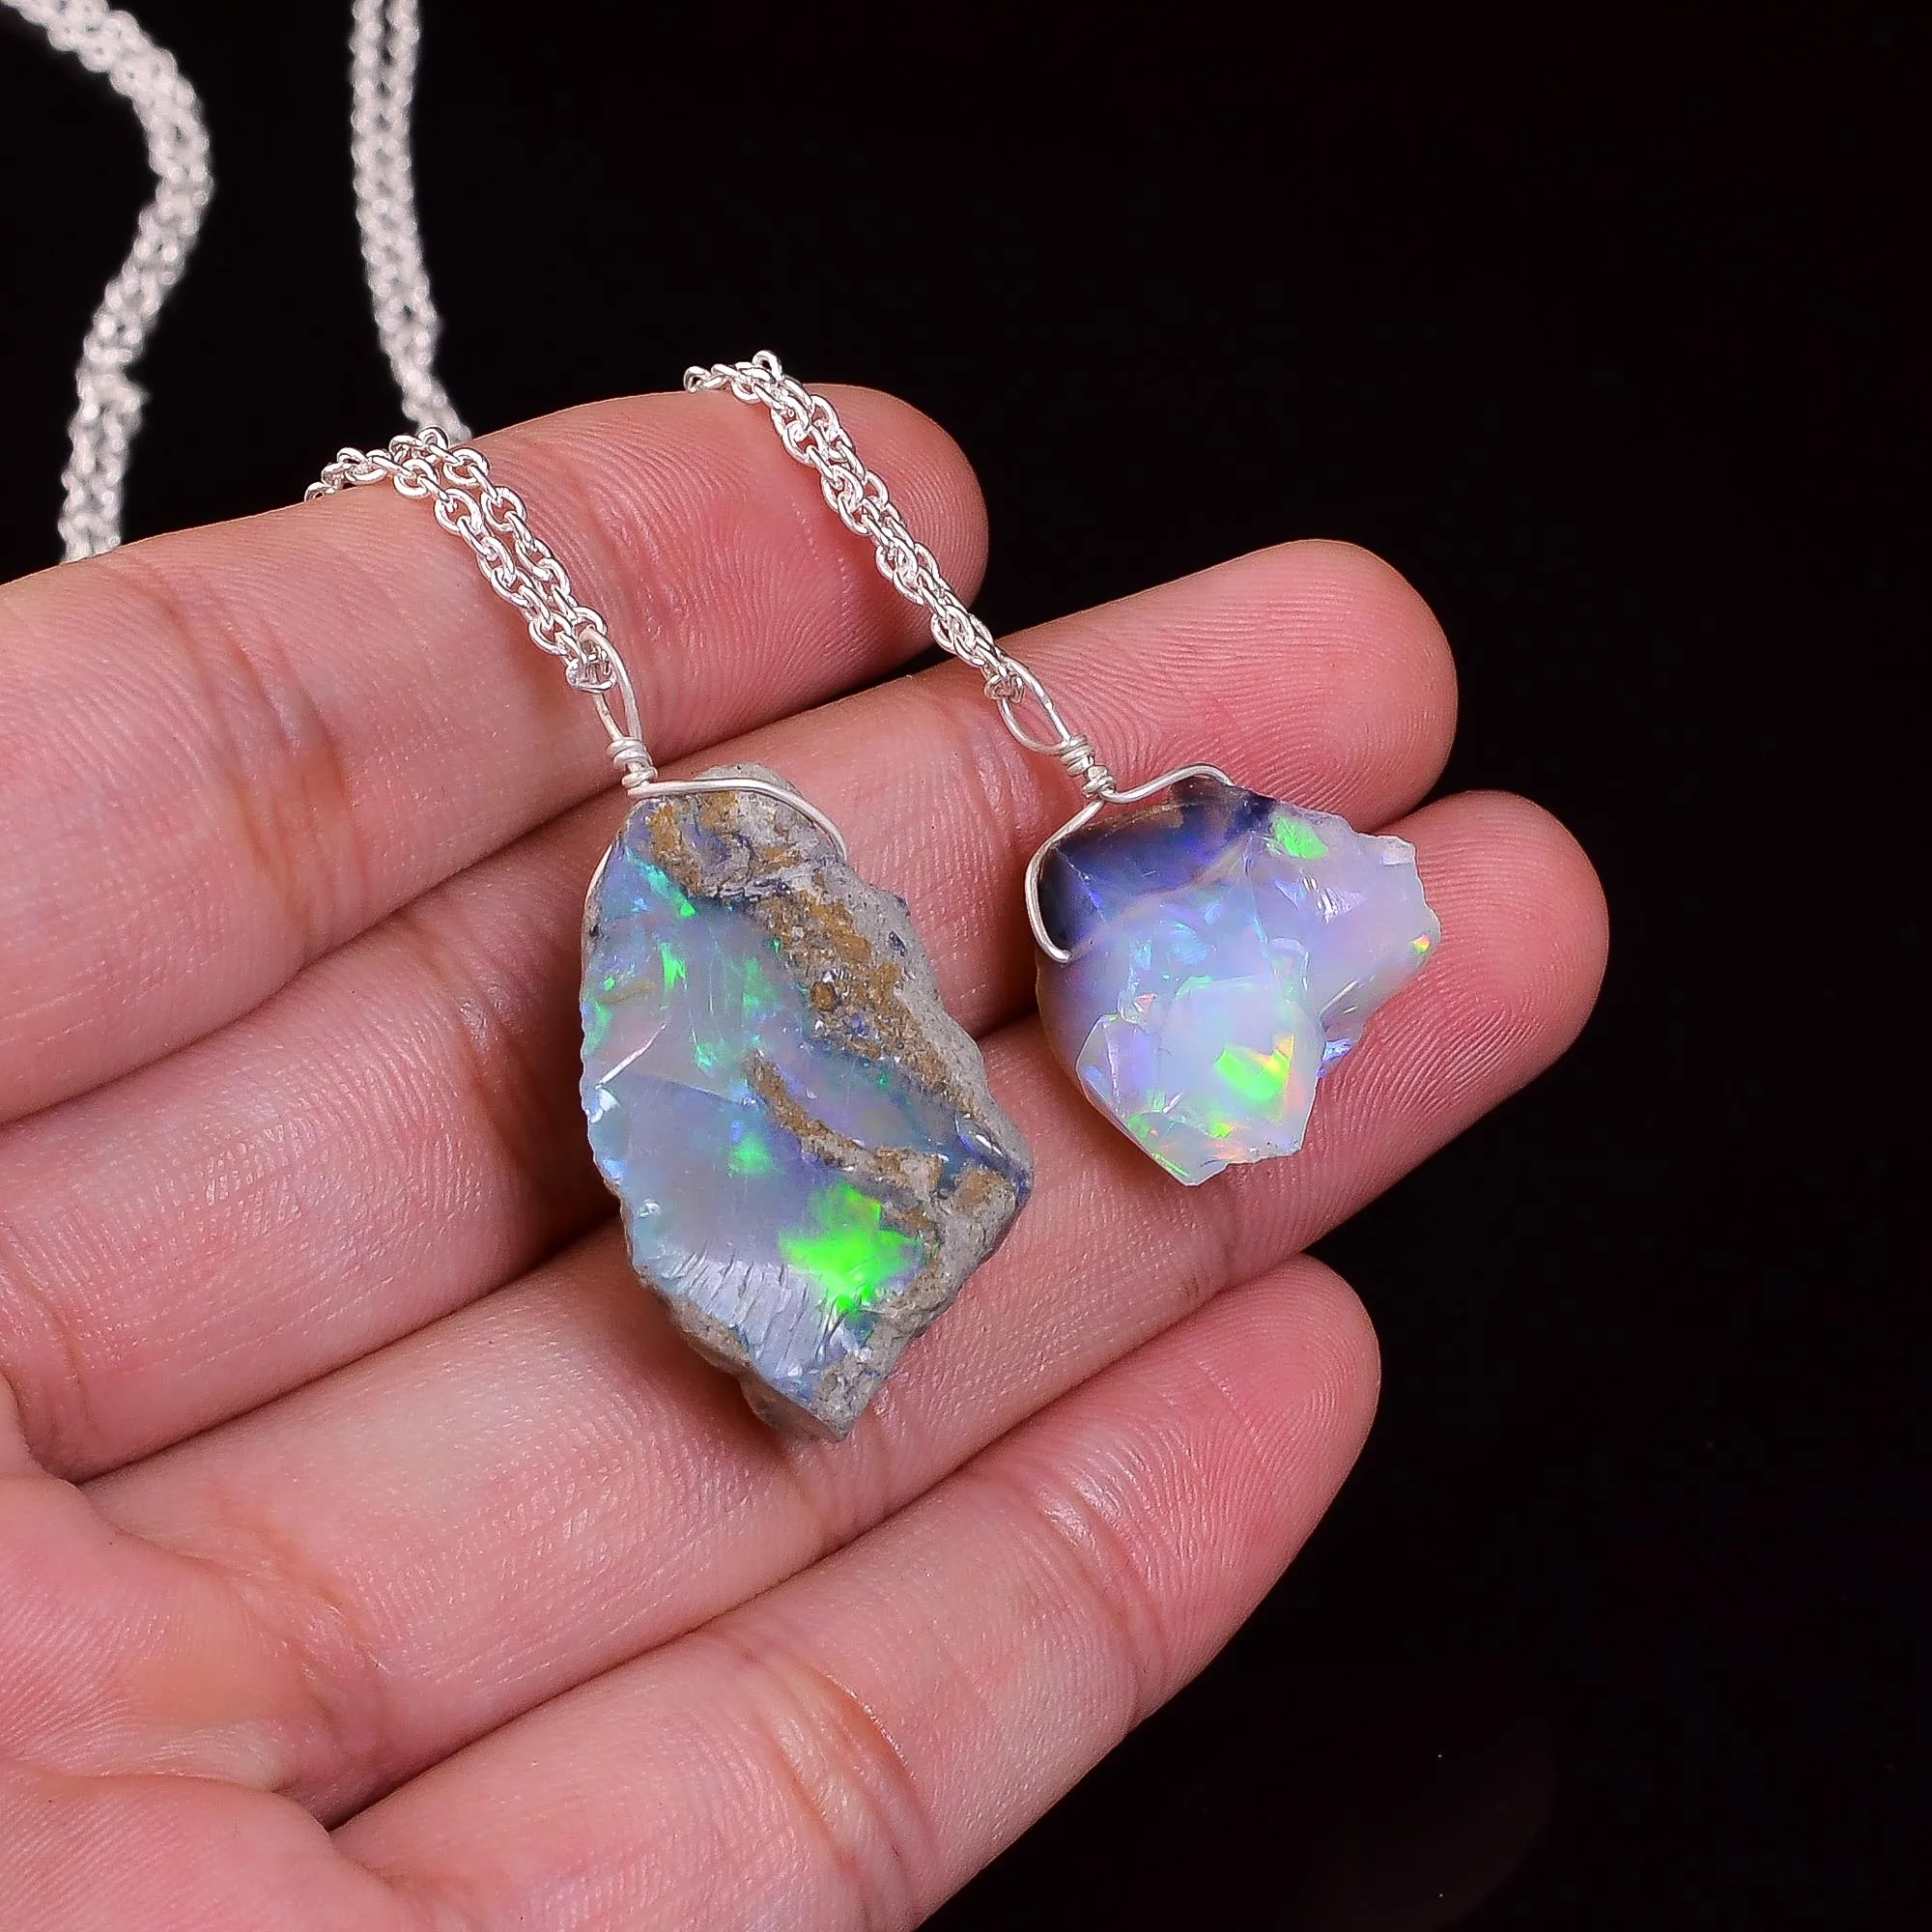 WHOLESALE 5PC 925 SOLID STERLING SILVER NATURAL ETHIOPIAN OPAL PENDANT LOT O d34